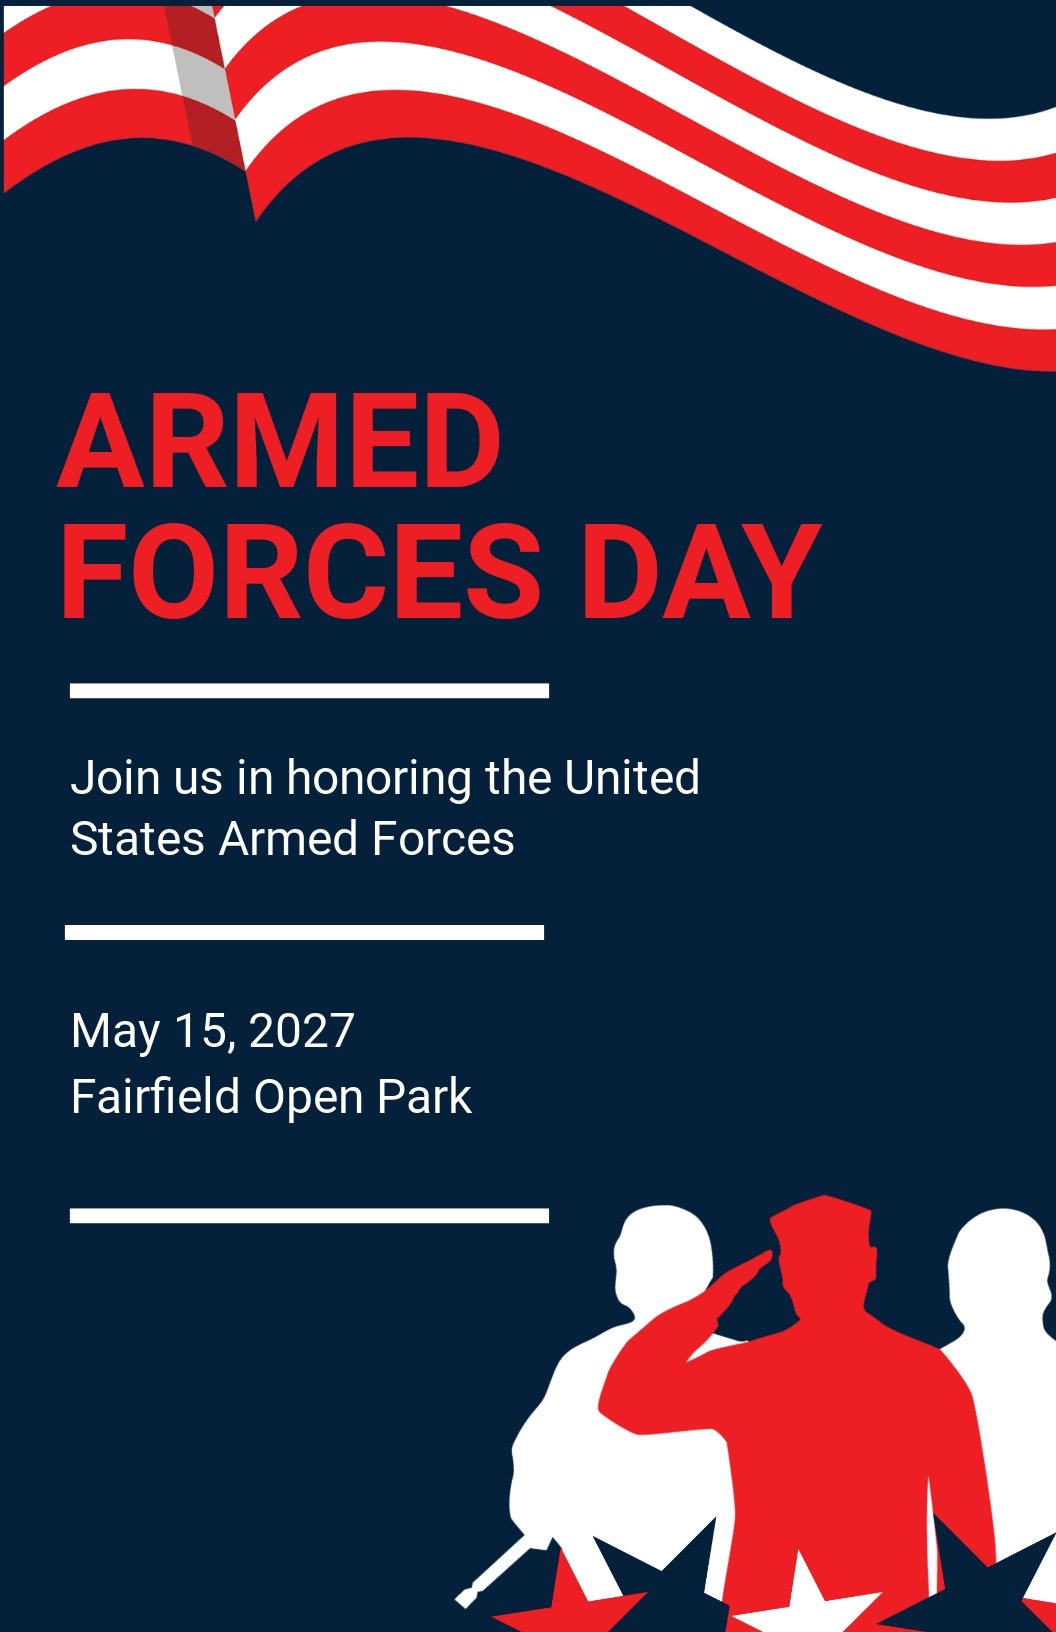 10-free-armed-forces-day-templates-ideas-designs-2021-template